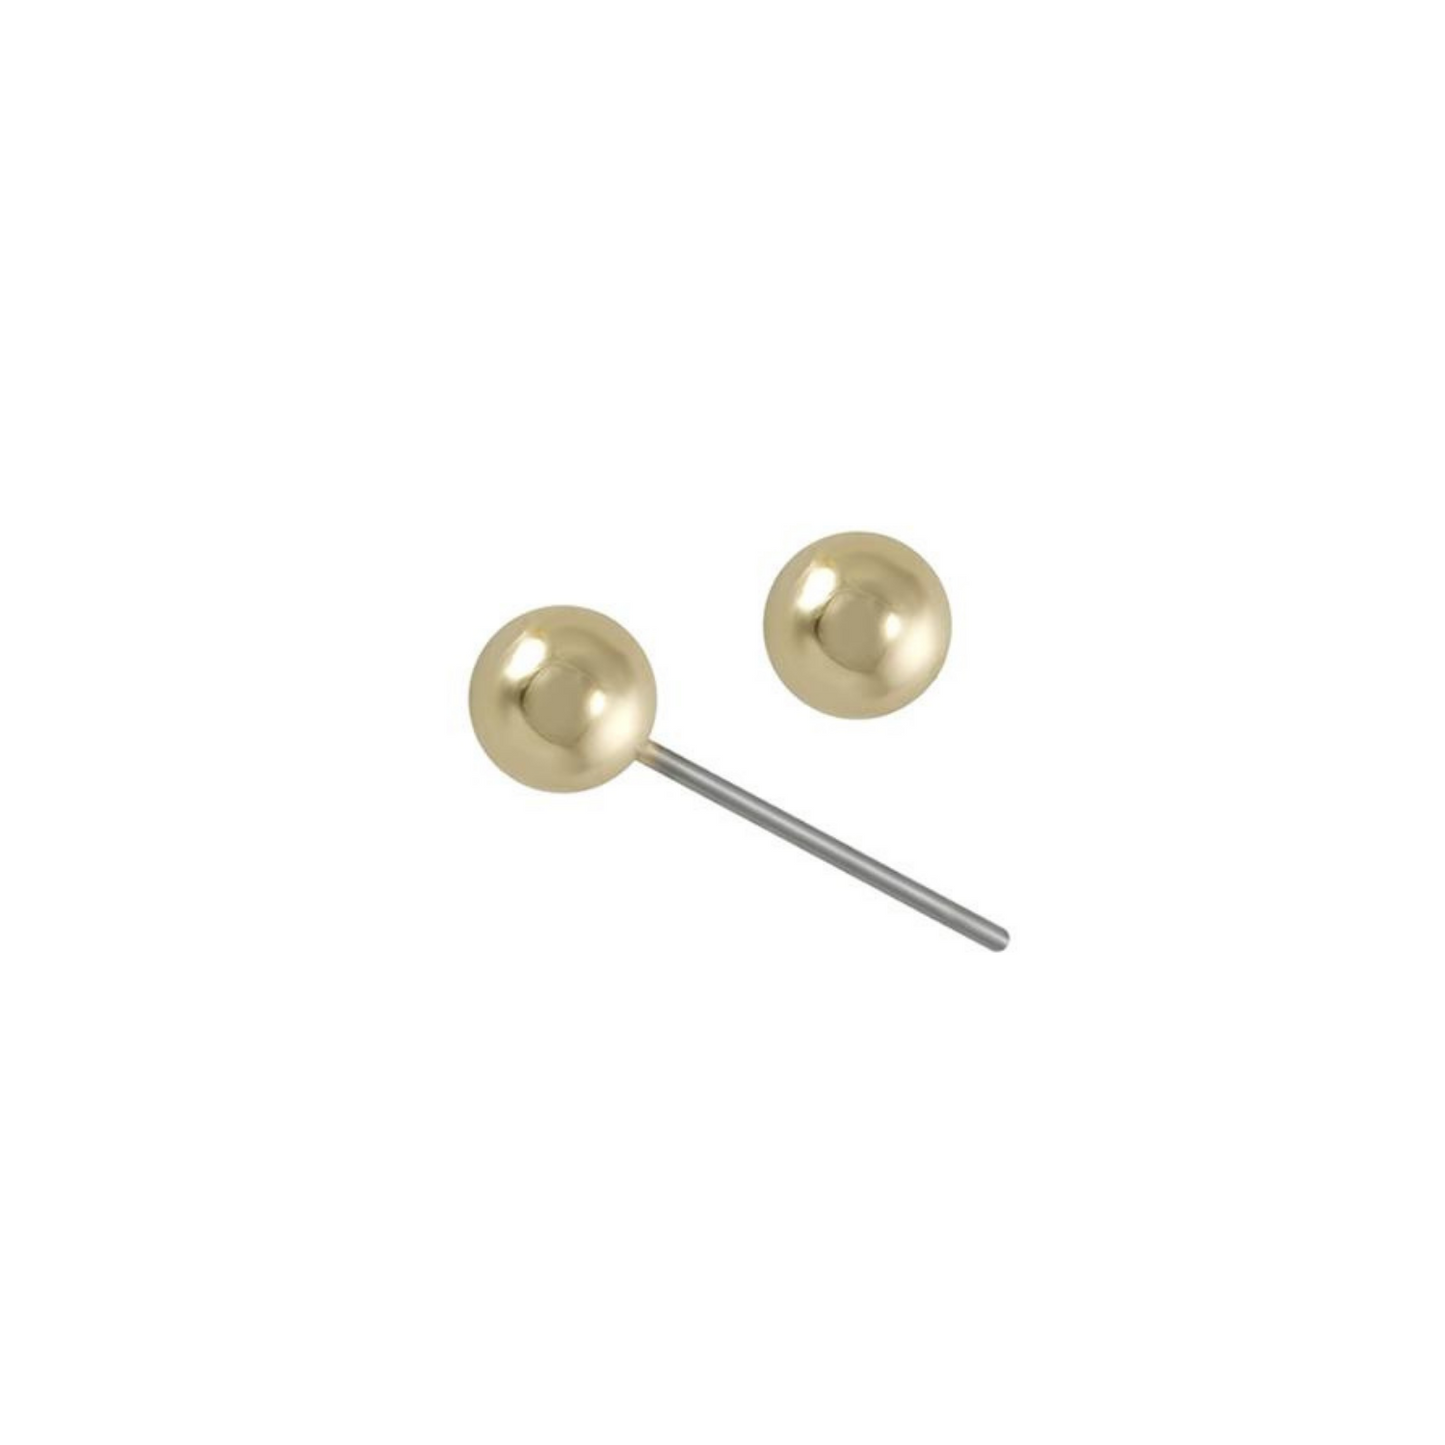 Penny 4mm Round Ball Stud Earrings, Gold - Zahra Jewelry